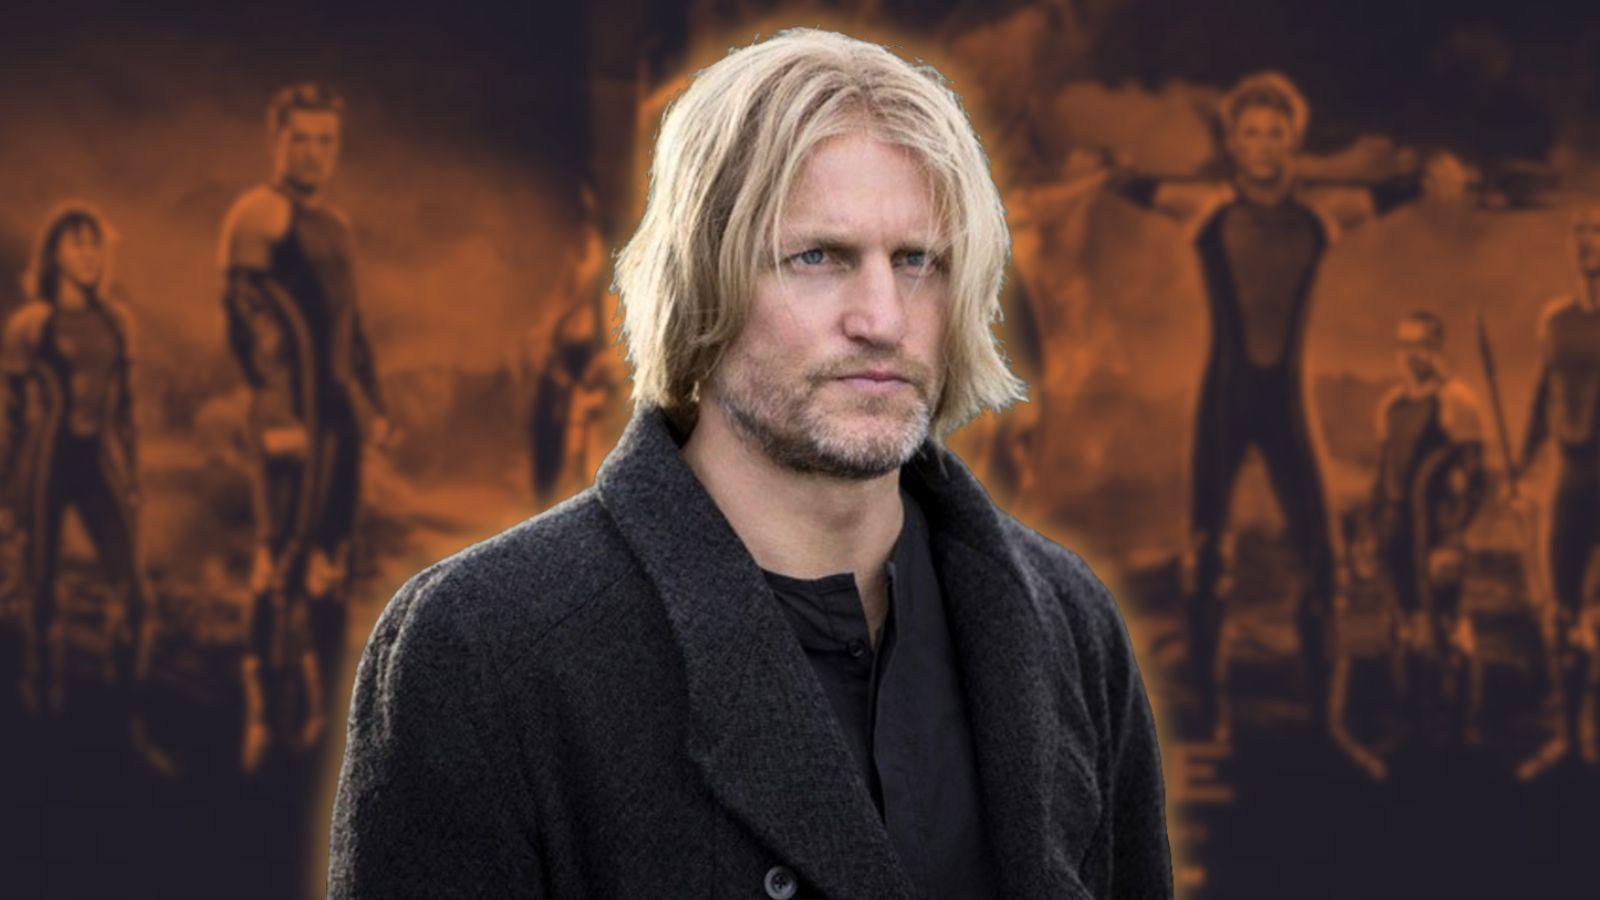 Woody Harrelson as Haymitch Abernathy in The Hunger Games Catching Fire.